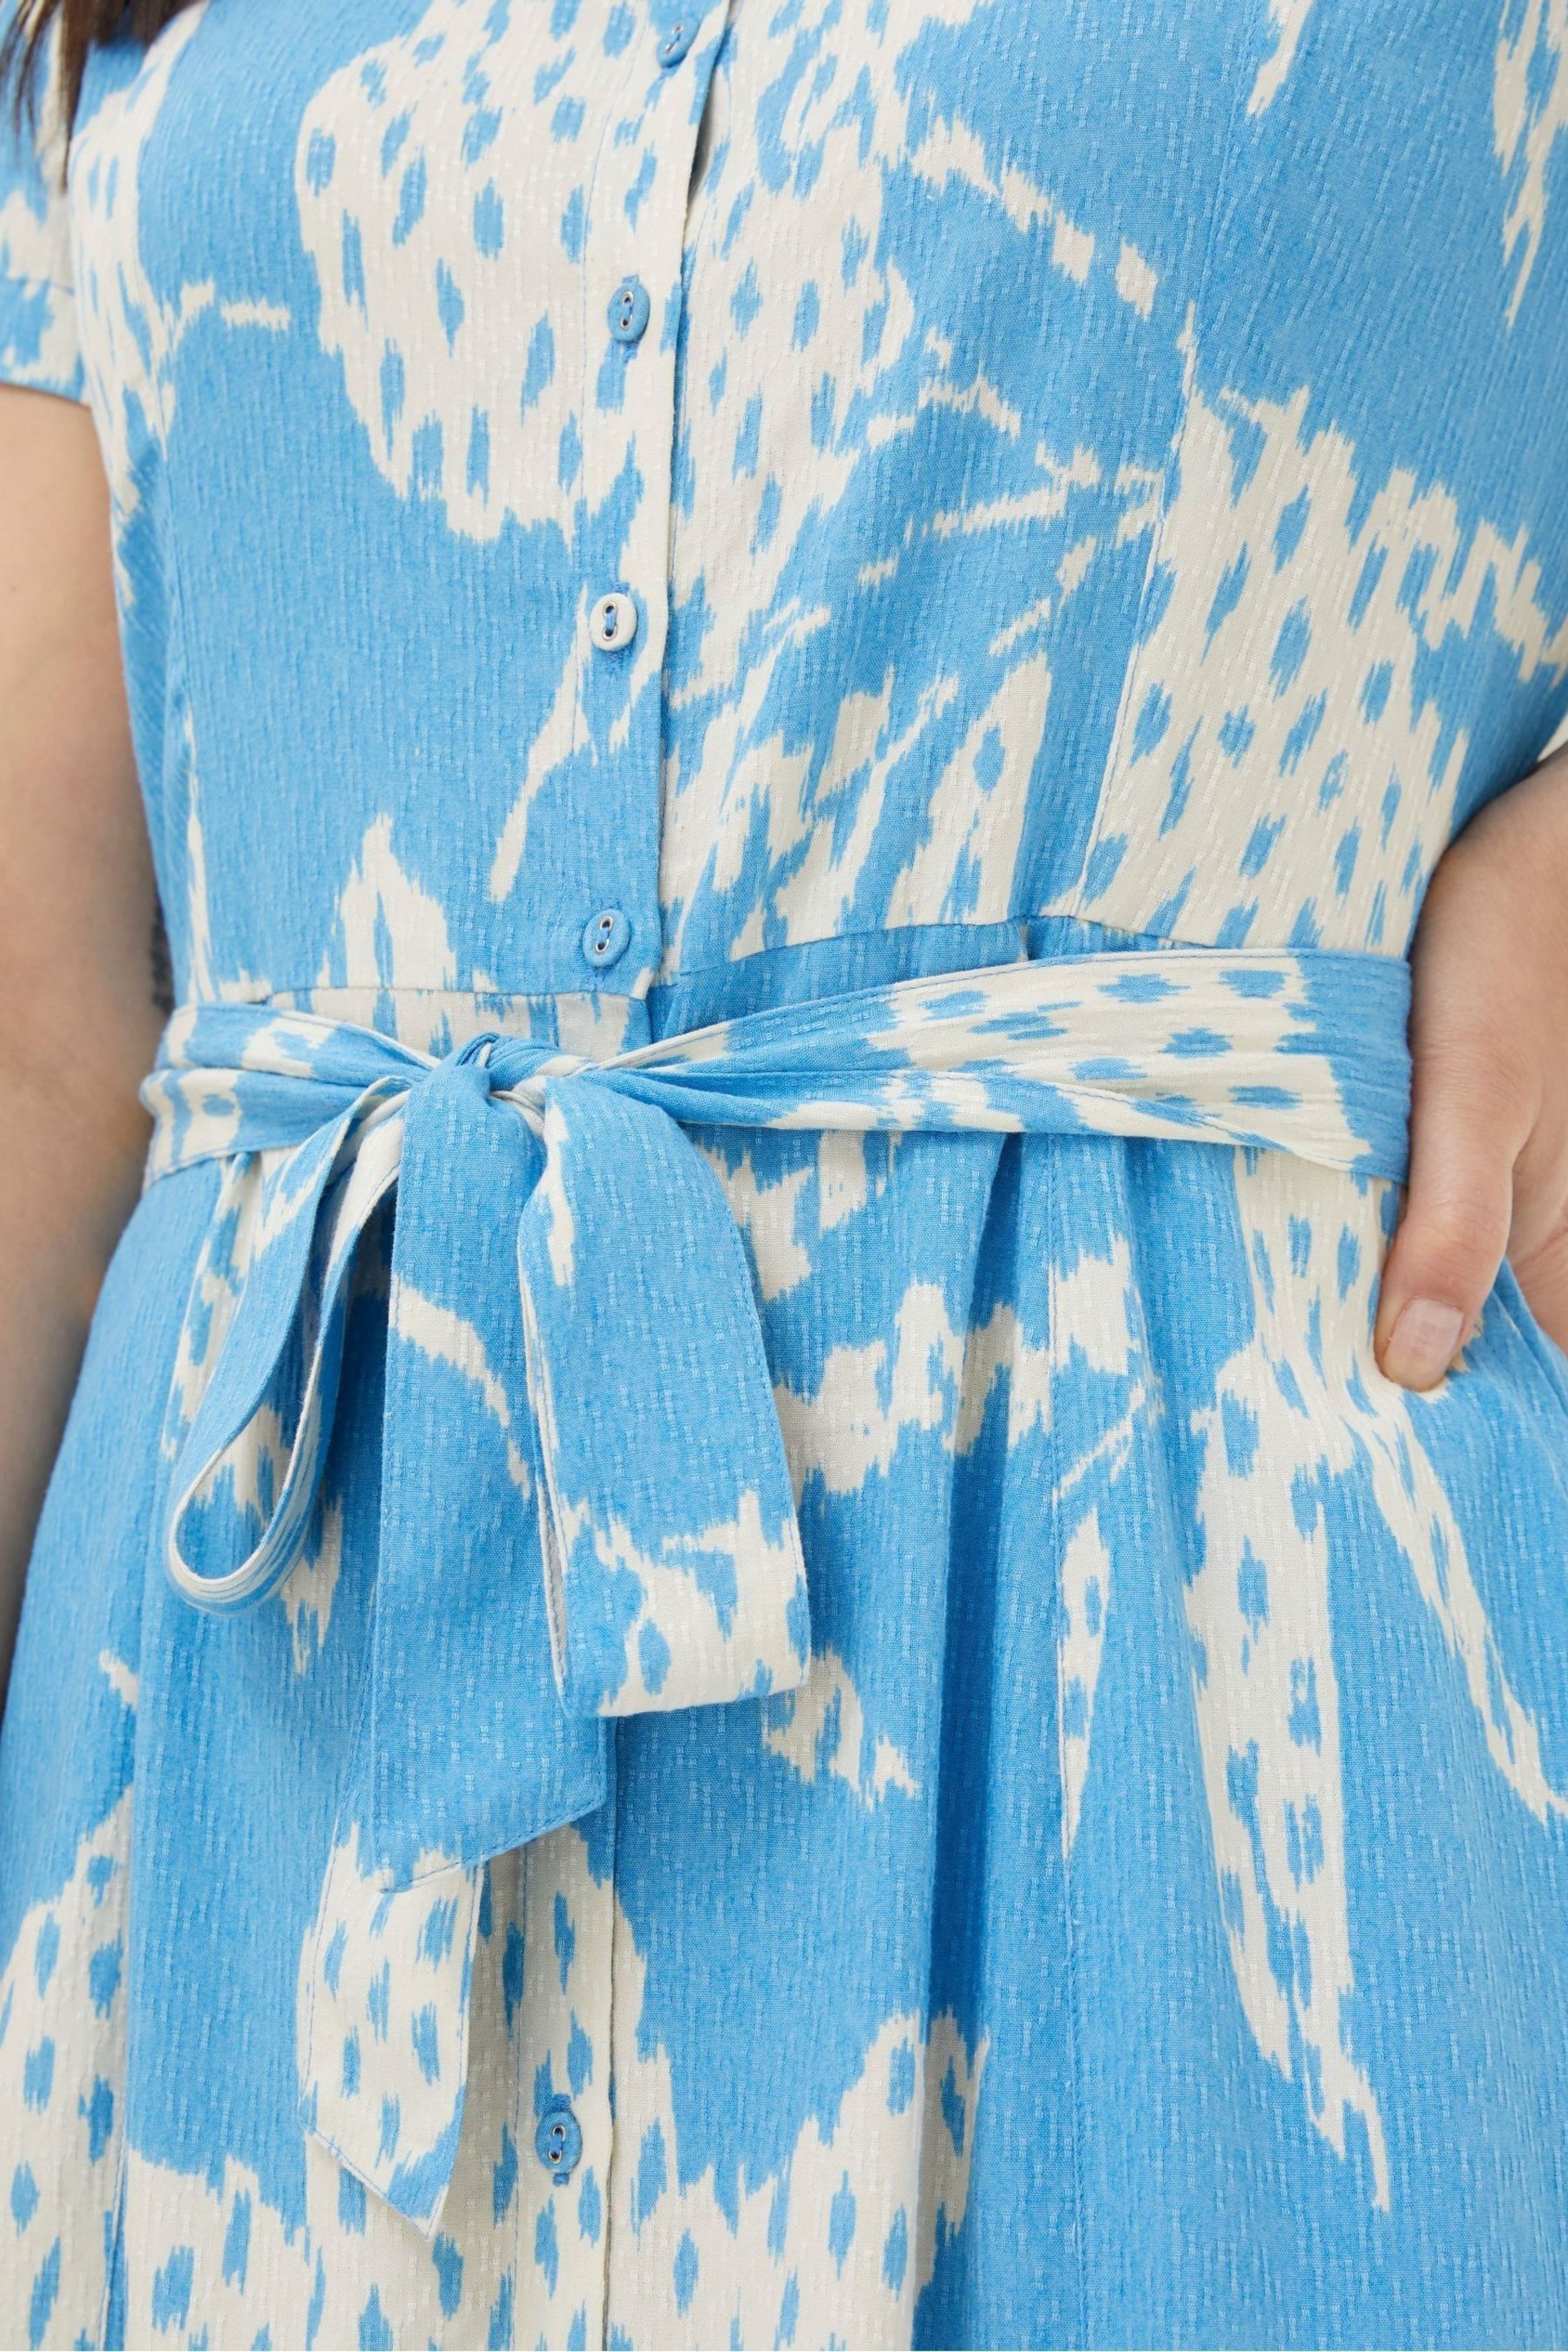 FatFace Blue Aster Textured Leaves Midi Dress - Image 6 of 7